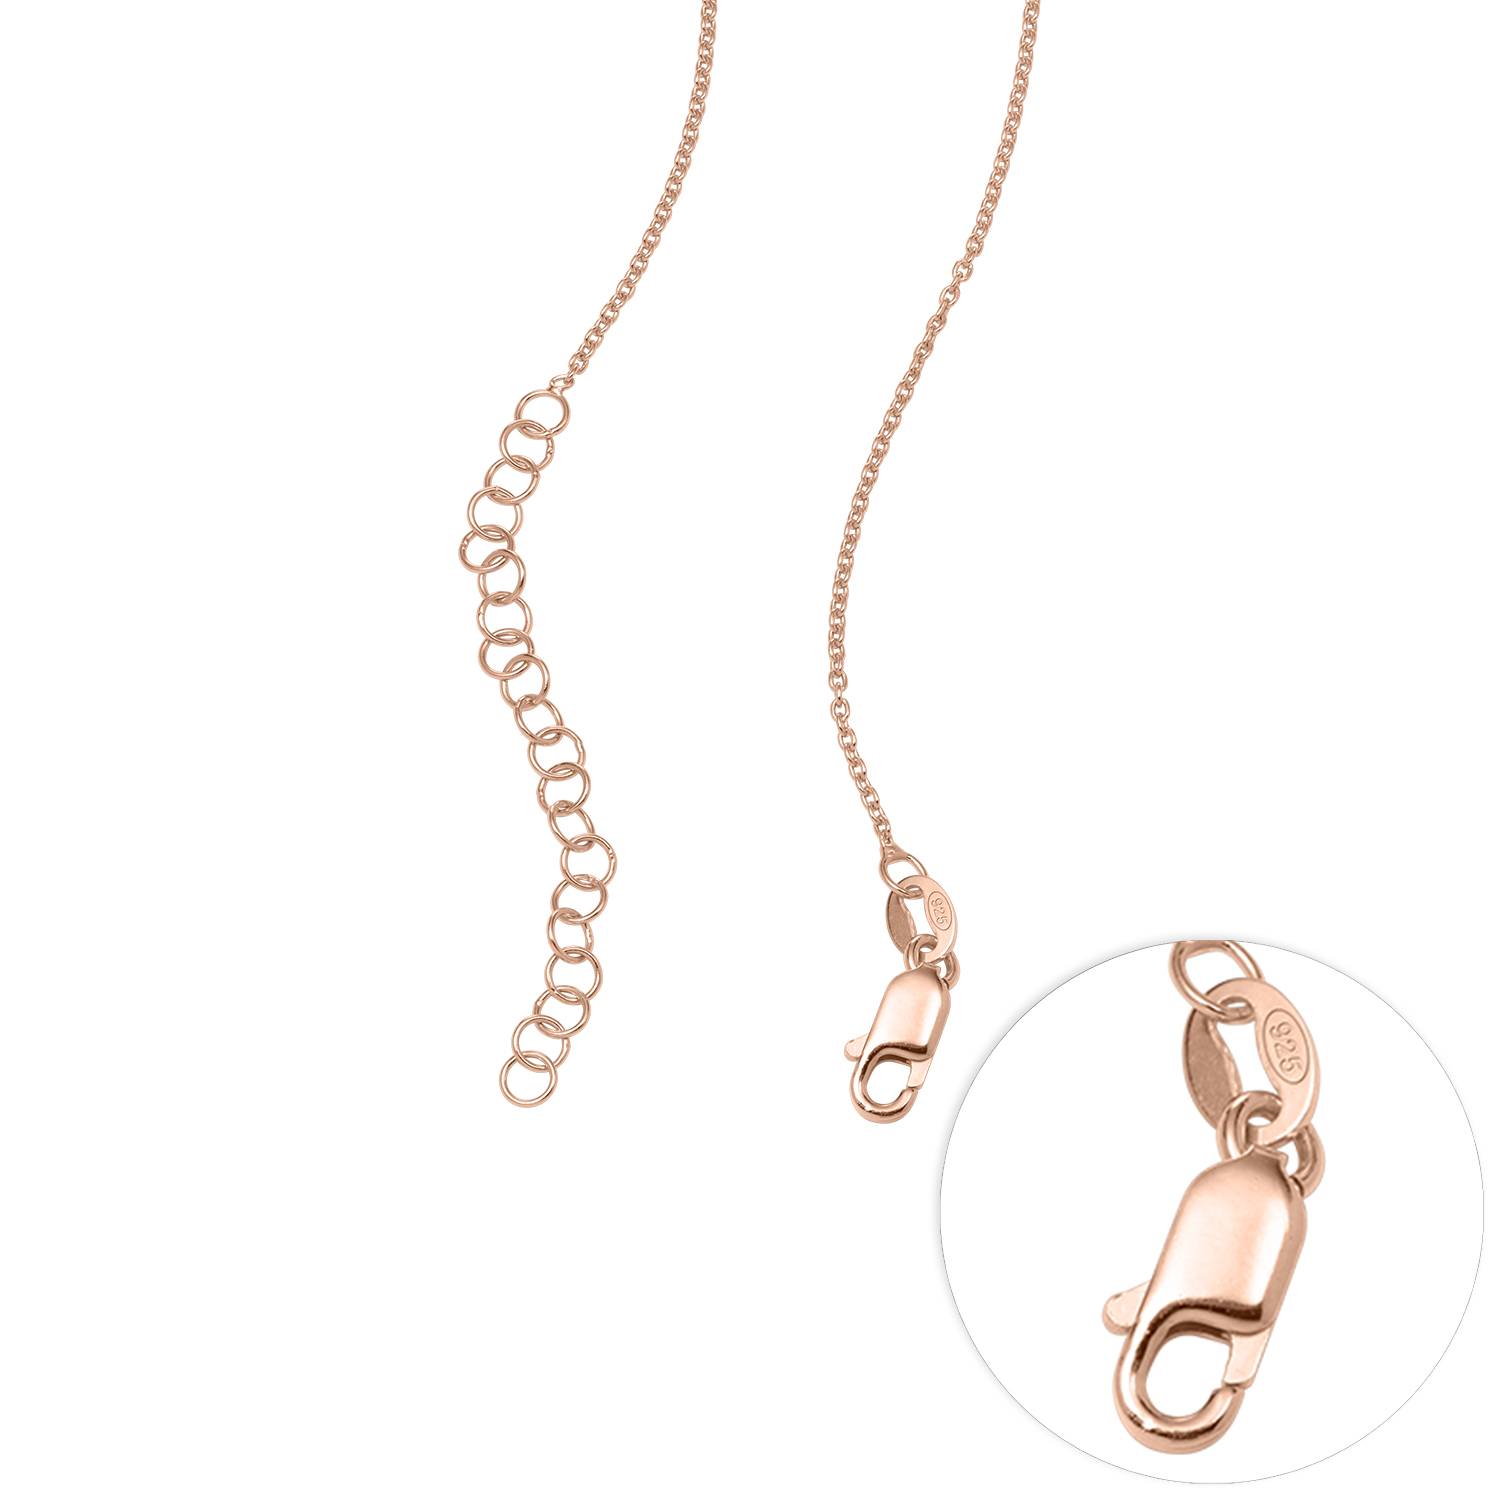 Charming Heart Necklace with Engraved Initial Beads in 18K Rose Gold Plating-5 product photo